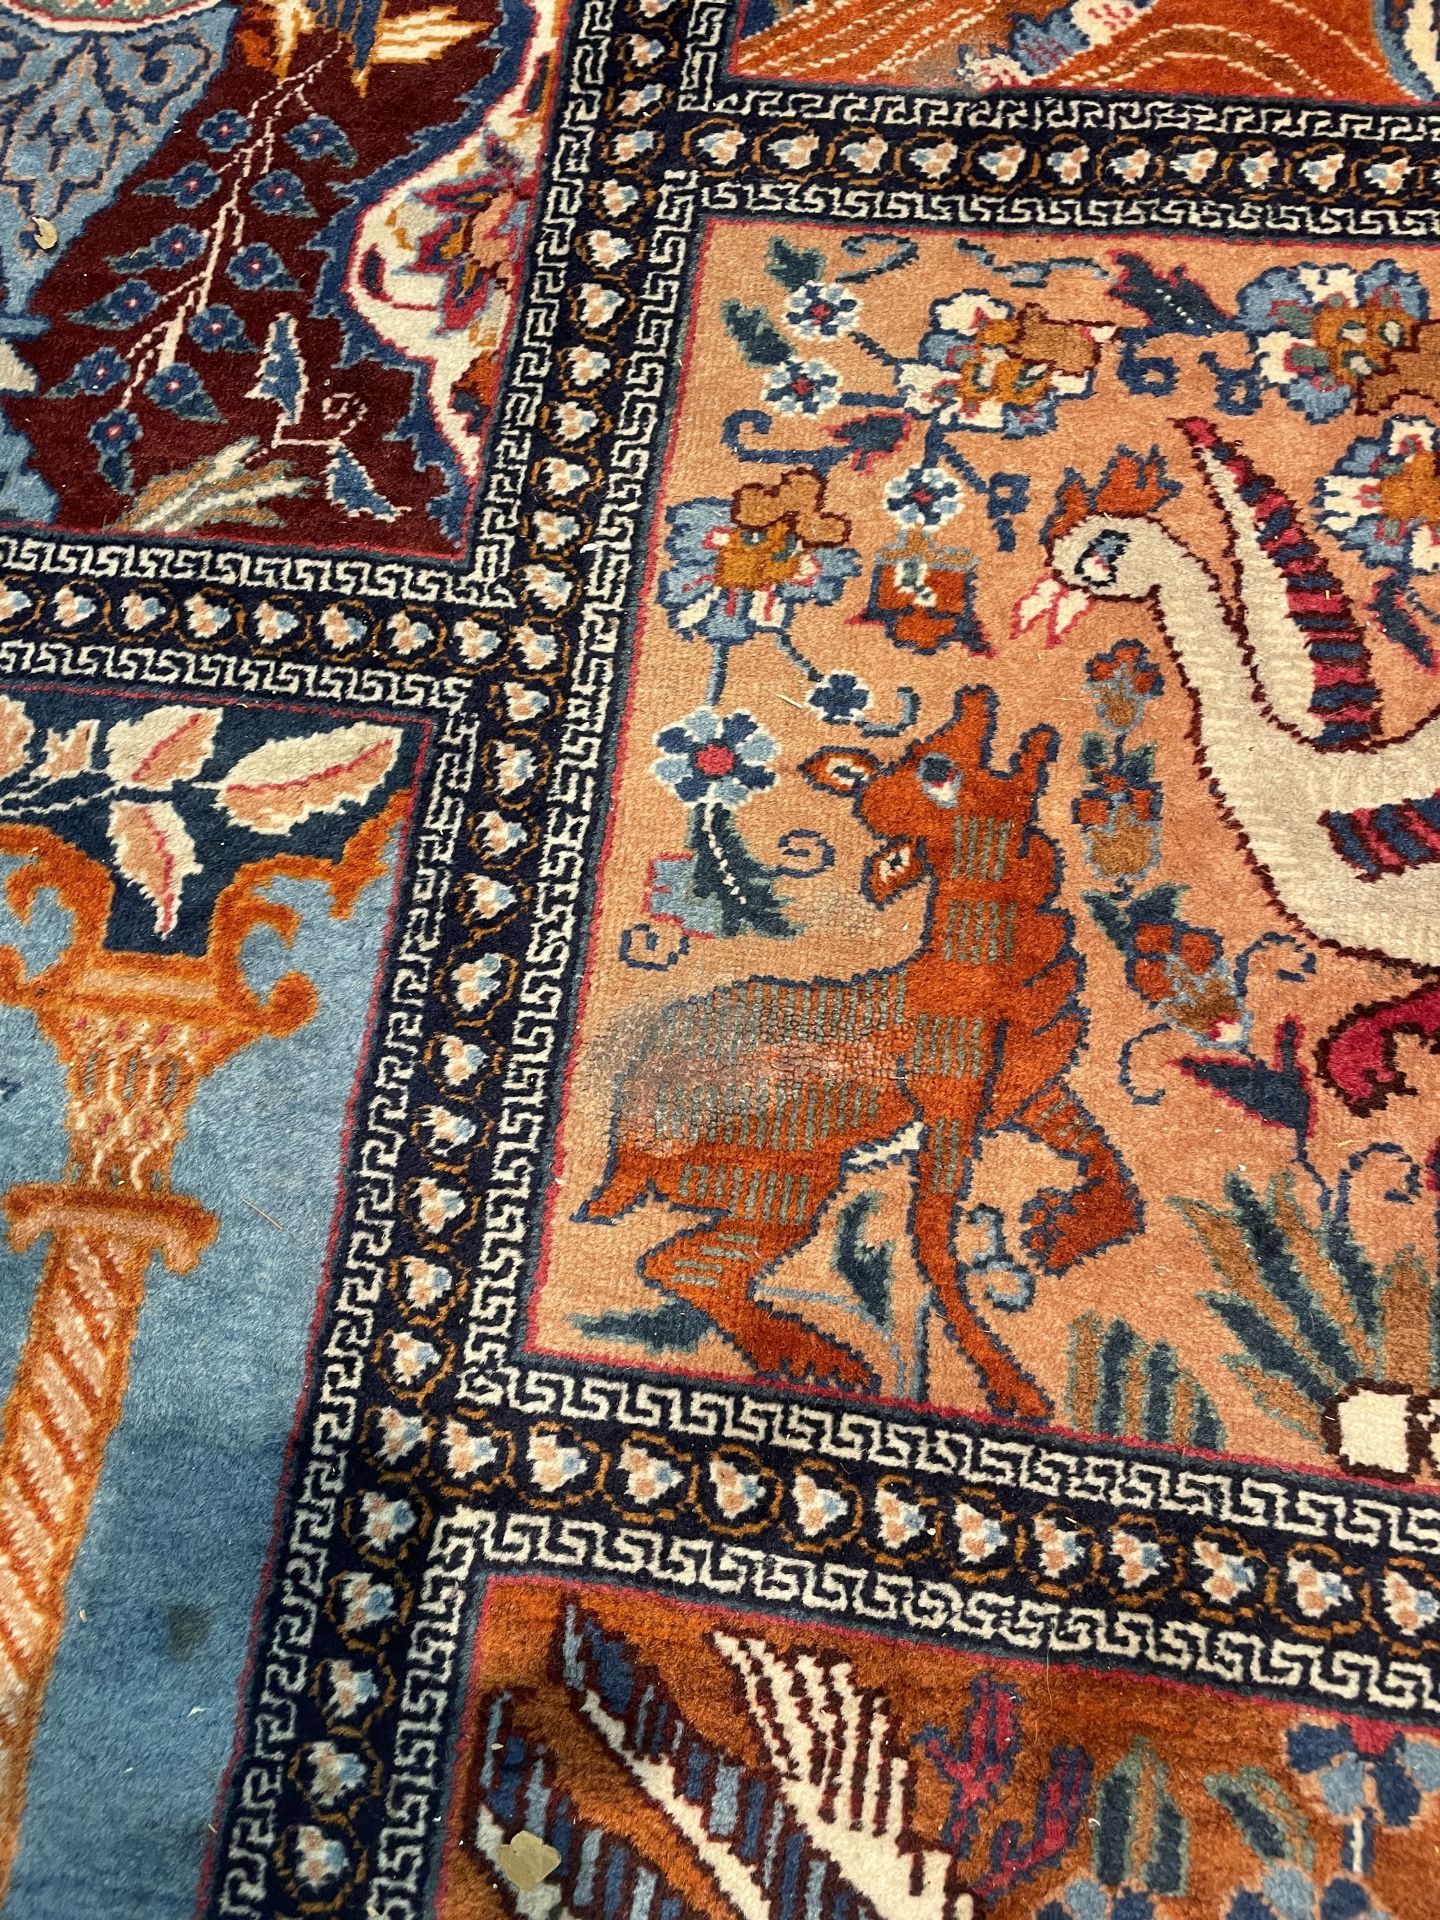 A Persian Bakhtiari rug with animals and floral design, wool on cotton, Iran, 20th C. - Image 7 of 20